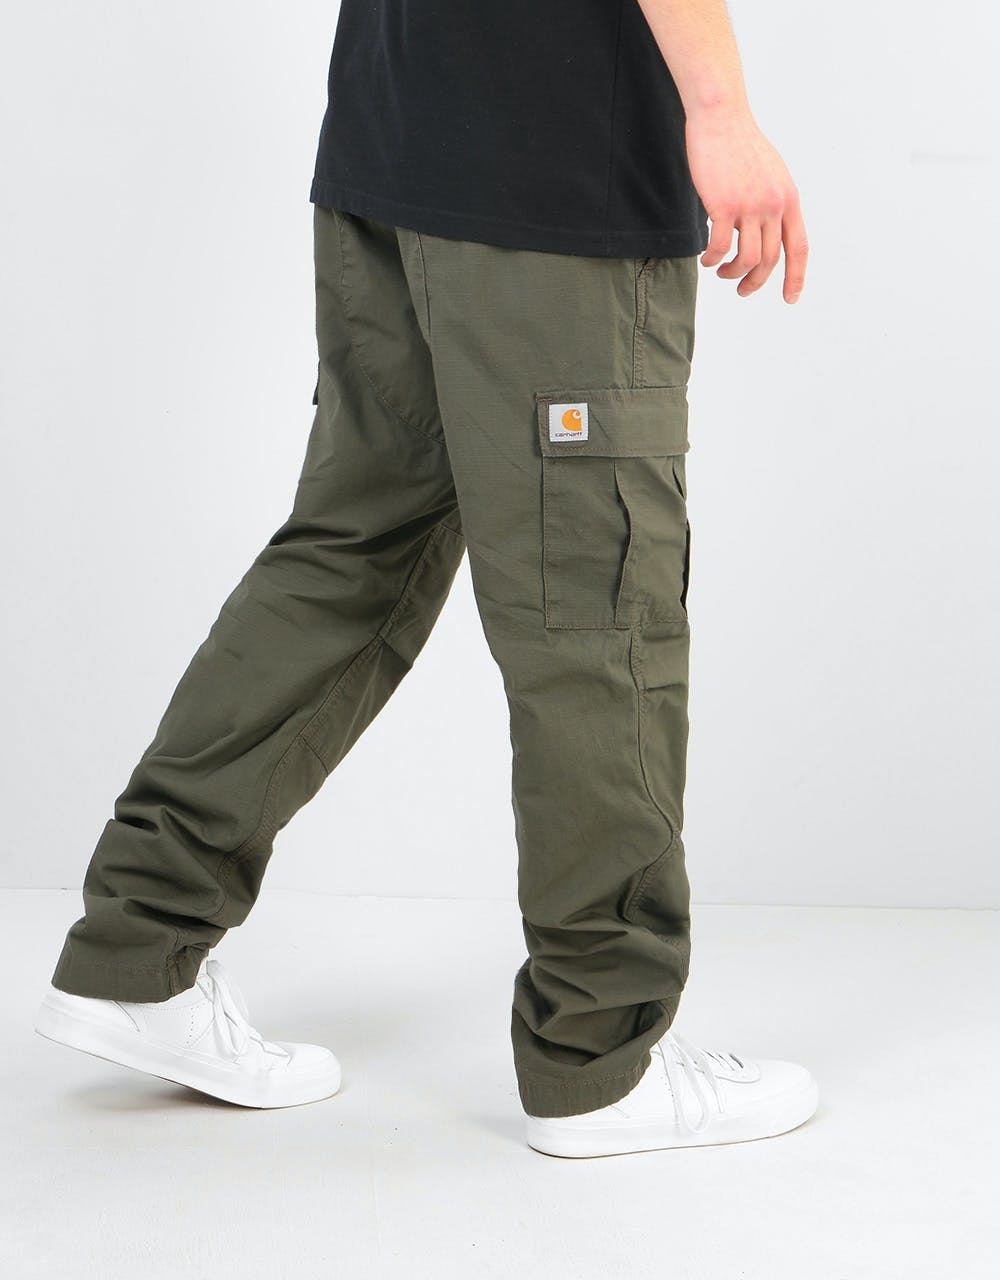 Carhartt WIP - Aviation Rinsed Smoke Green - Pants | IMPERICON US